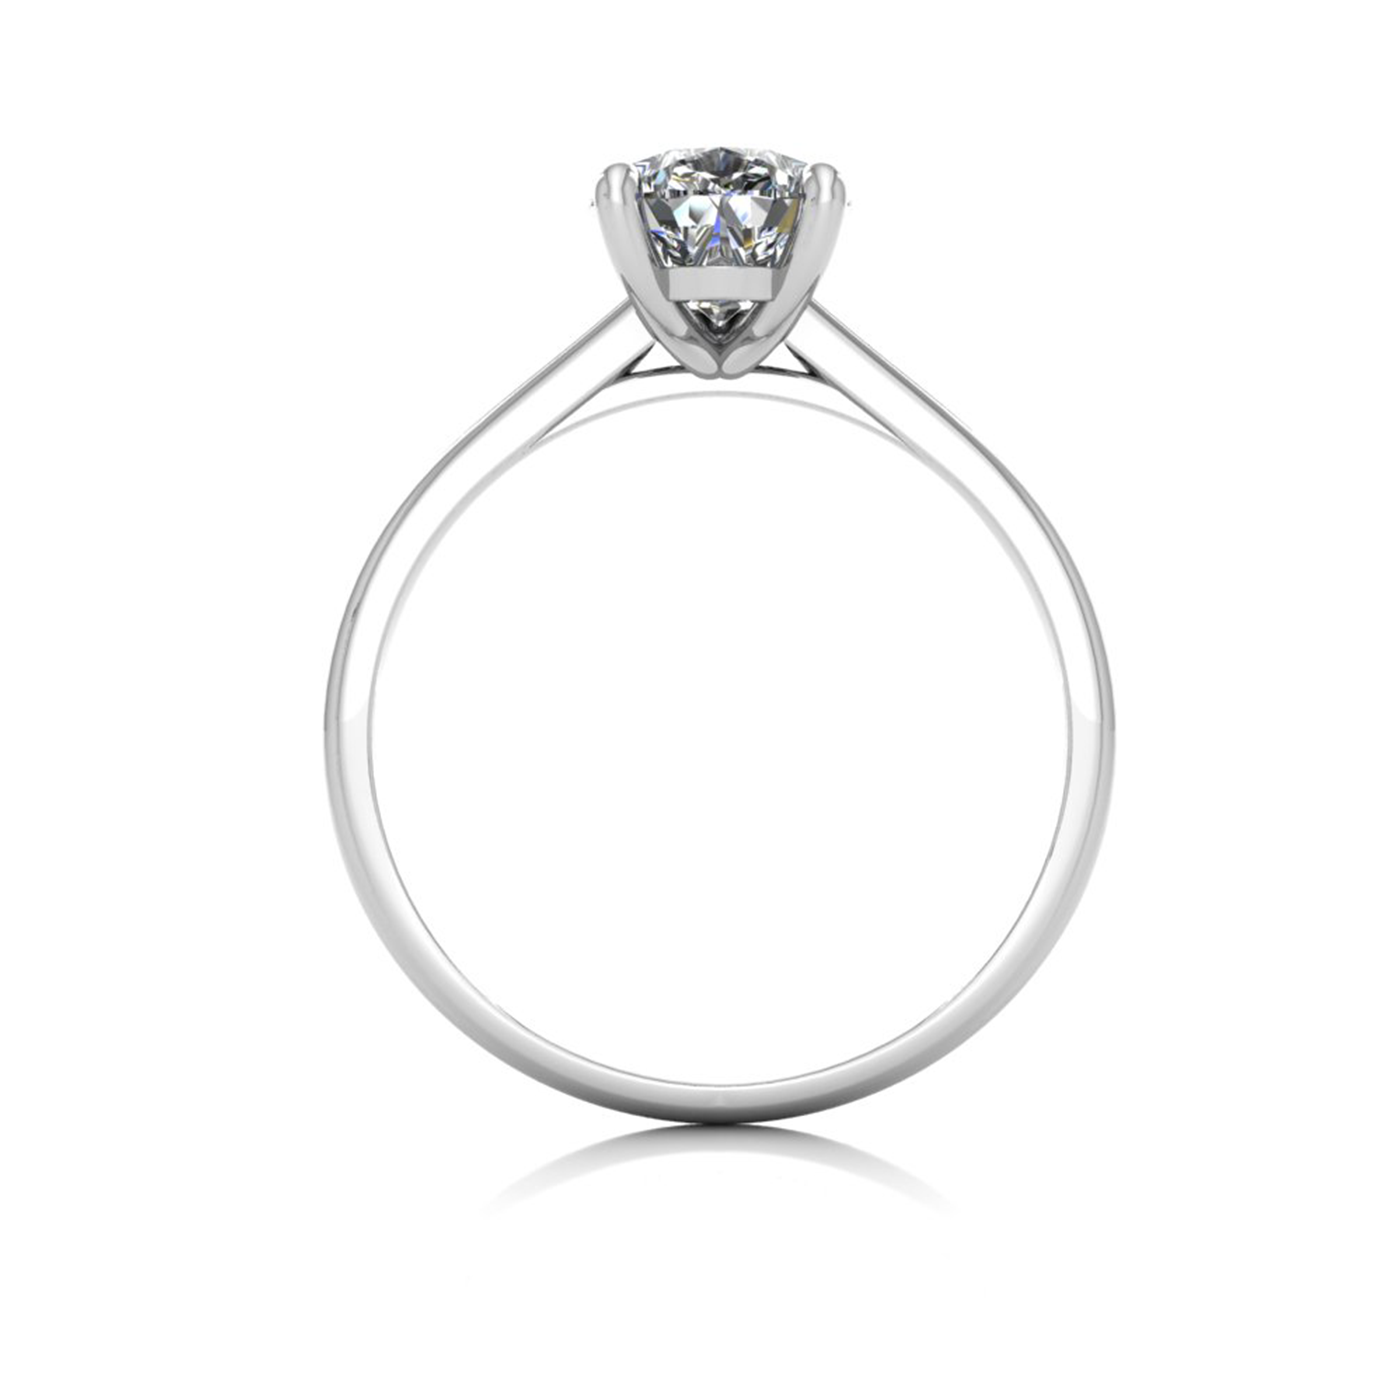 18K WHITE GOLD 3 PRONGS SOLITAIRE PEAR CUT DIAMOND ENGAGEMENT RING WITH WHISPER THIN BAND